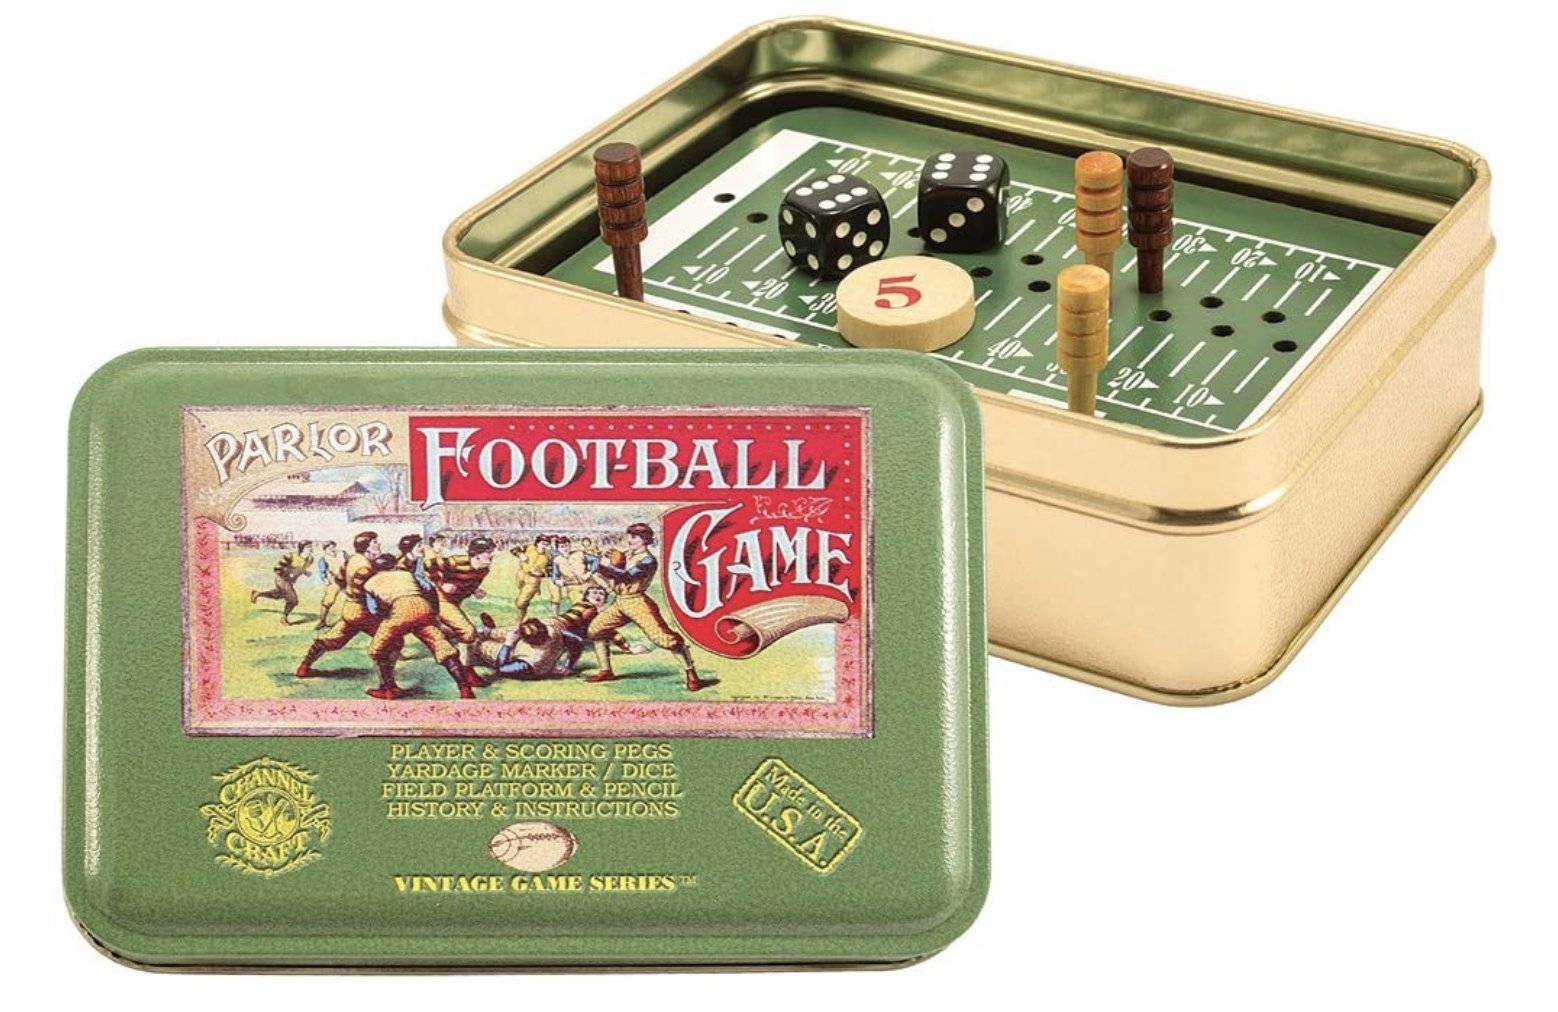 Parlor Football Vintage Game Series in Tin Box